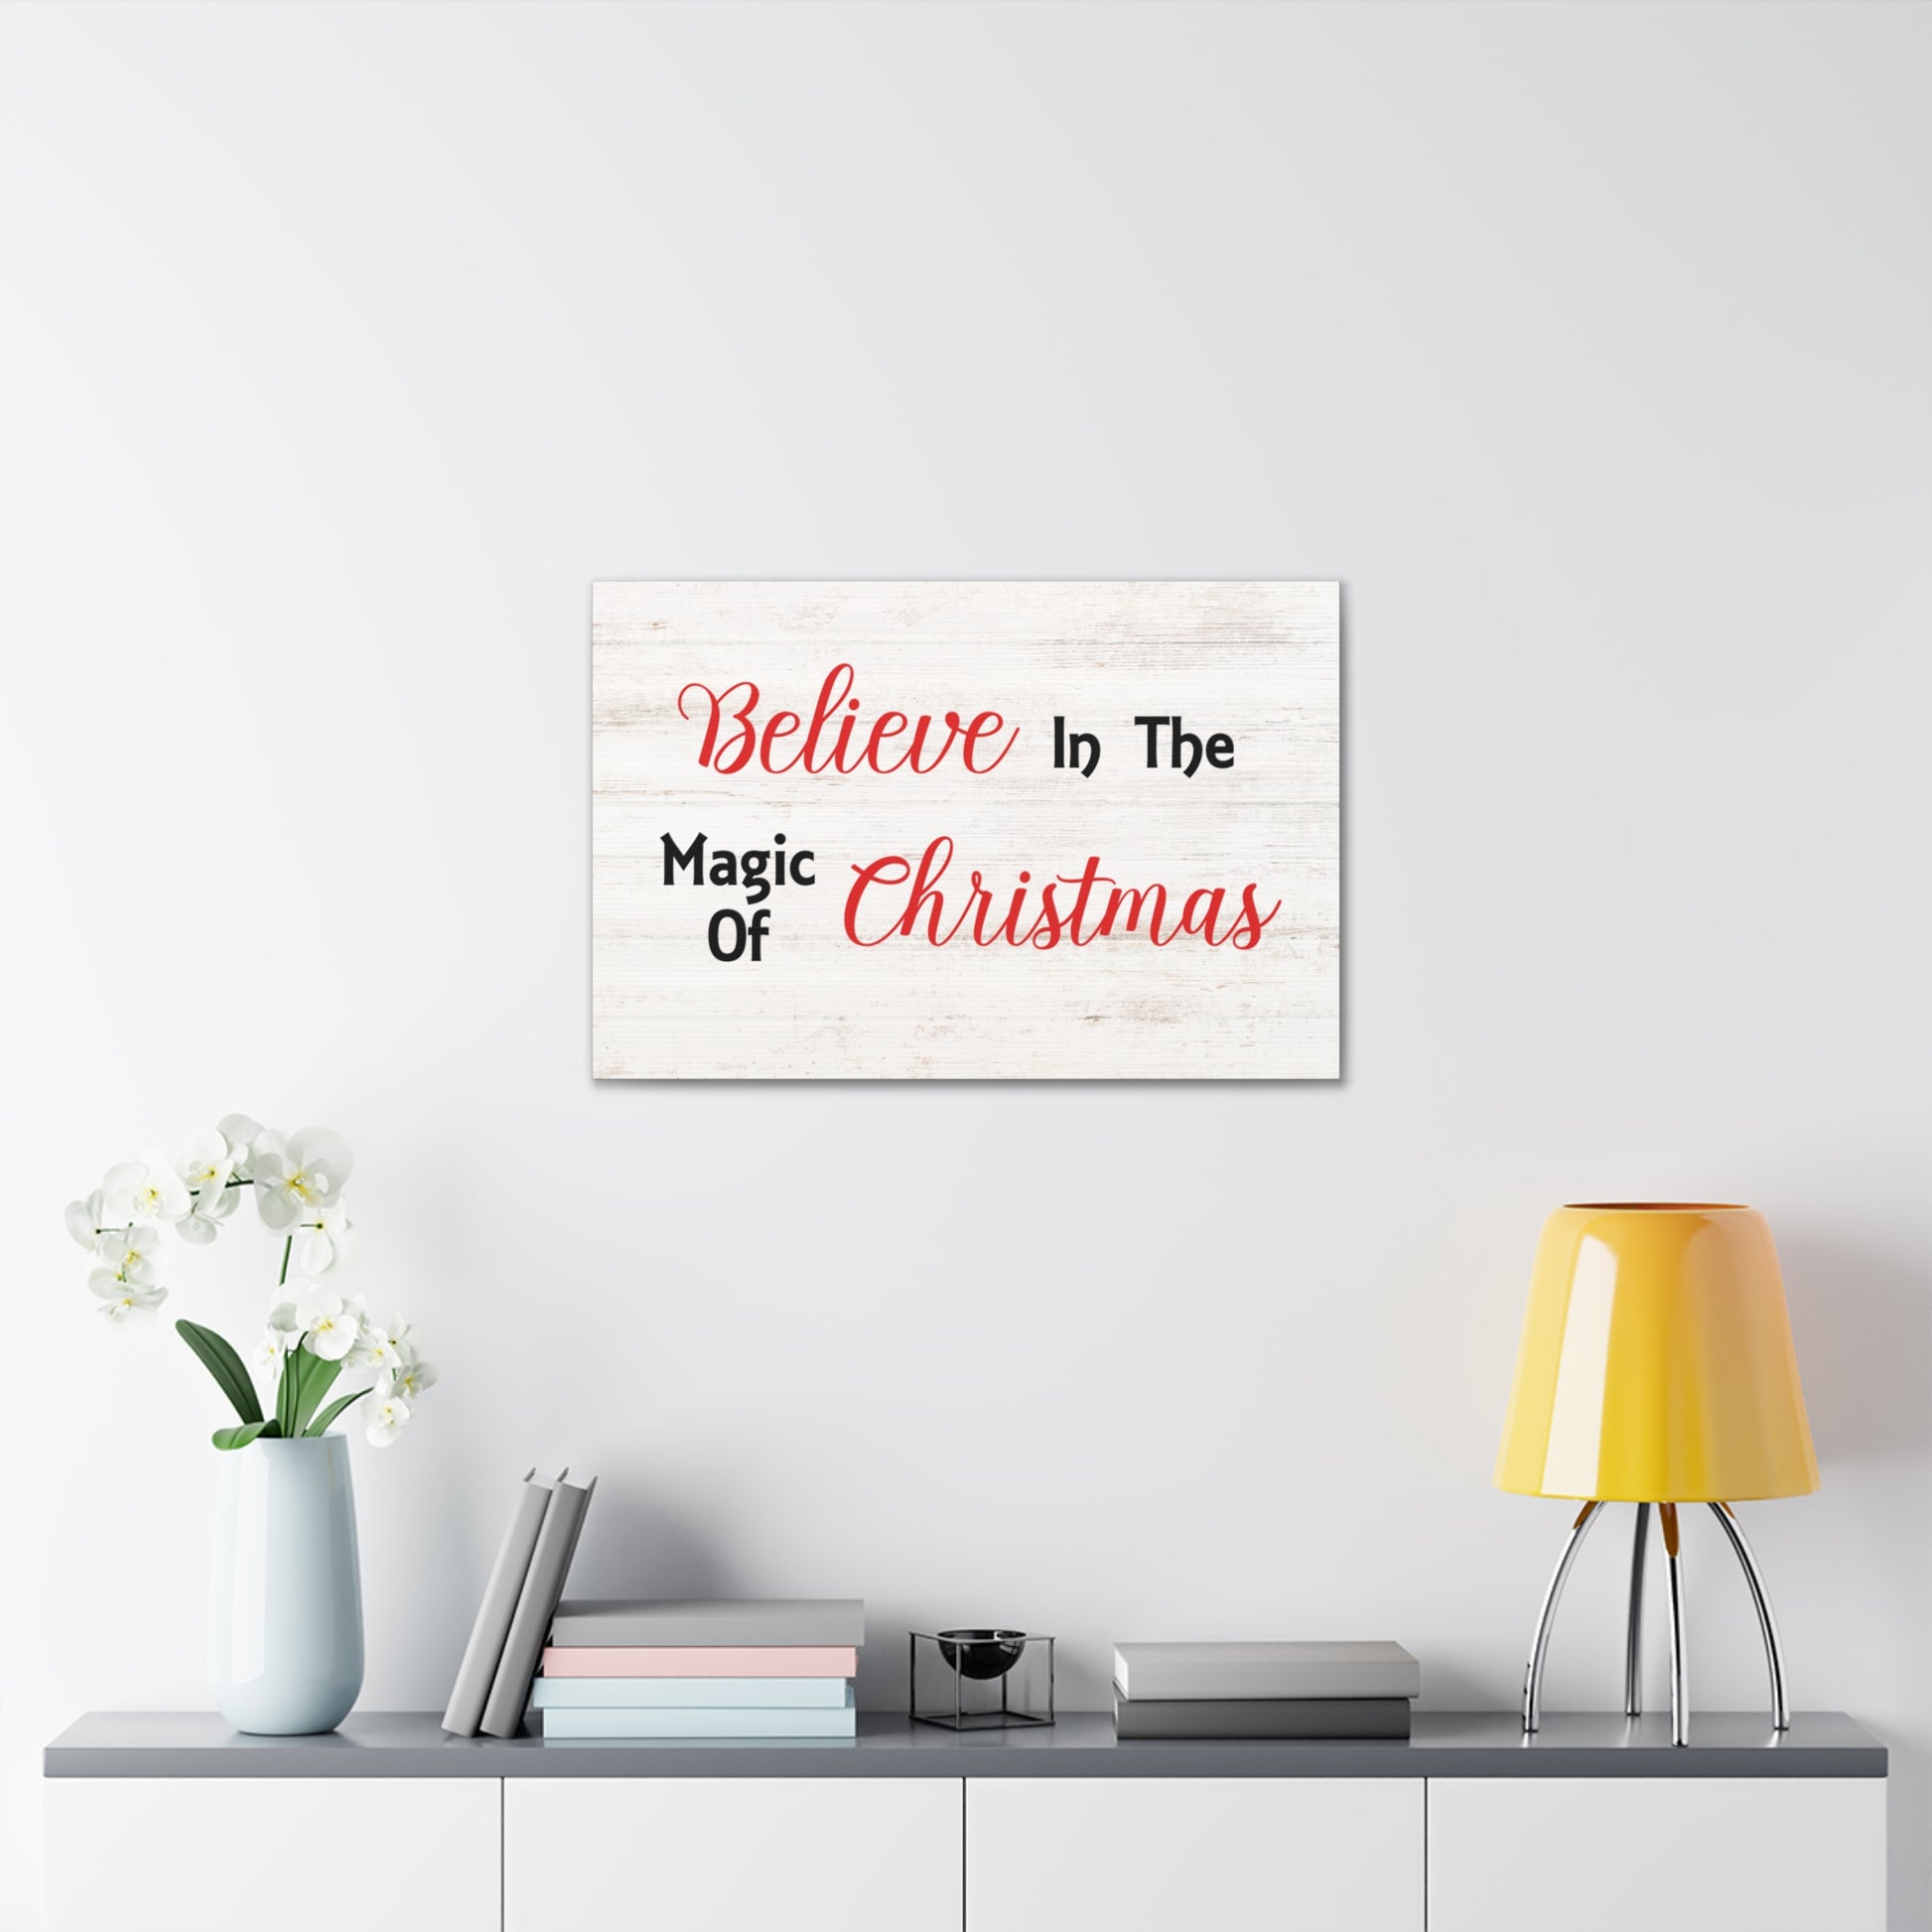 "Believe In The Magic Of Christmas" Wall Art - Weave Got Gifts - Unique Gifts You Won’t Find Anywhere Else!